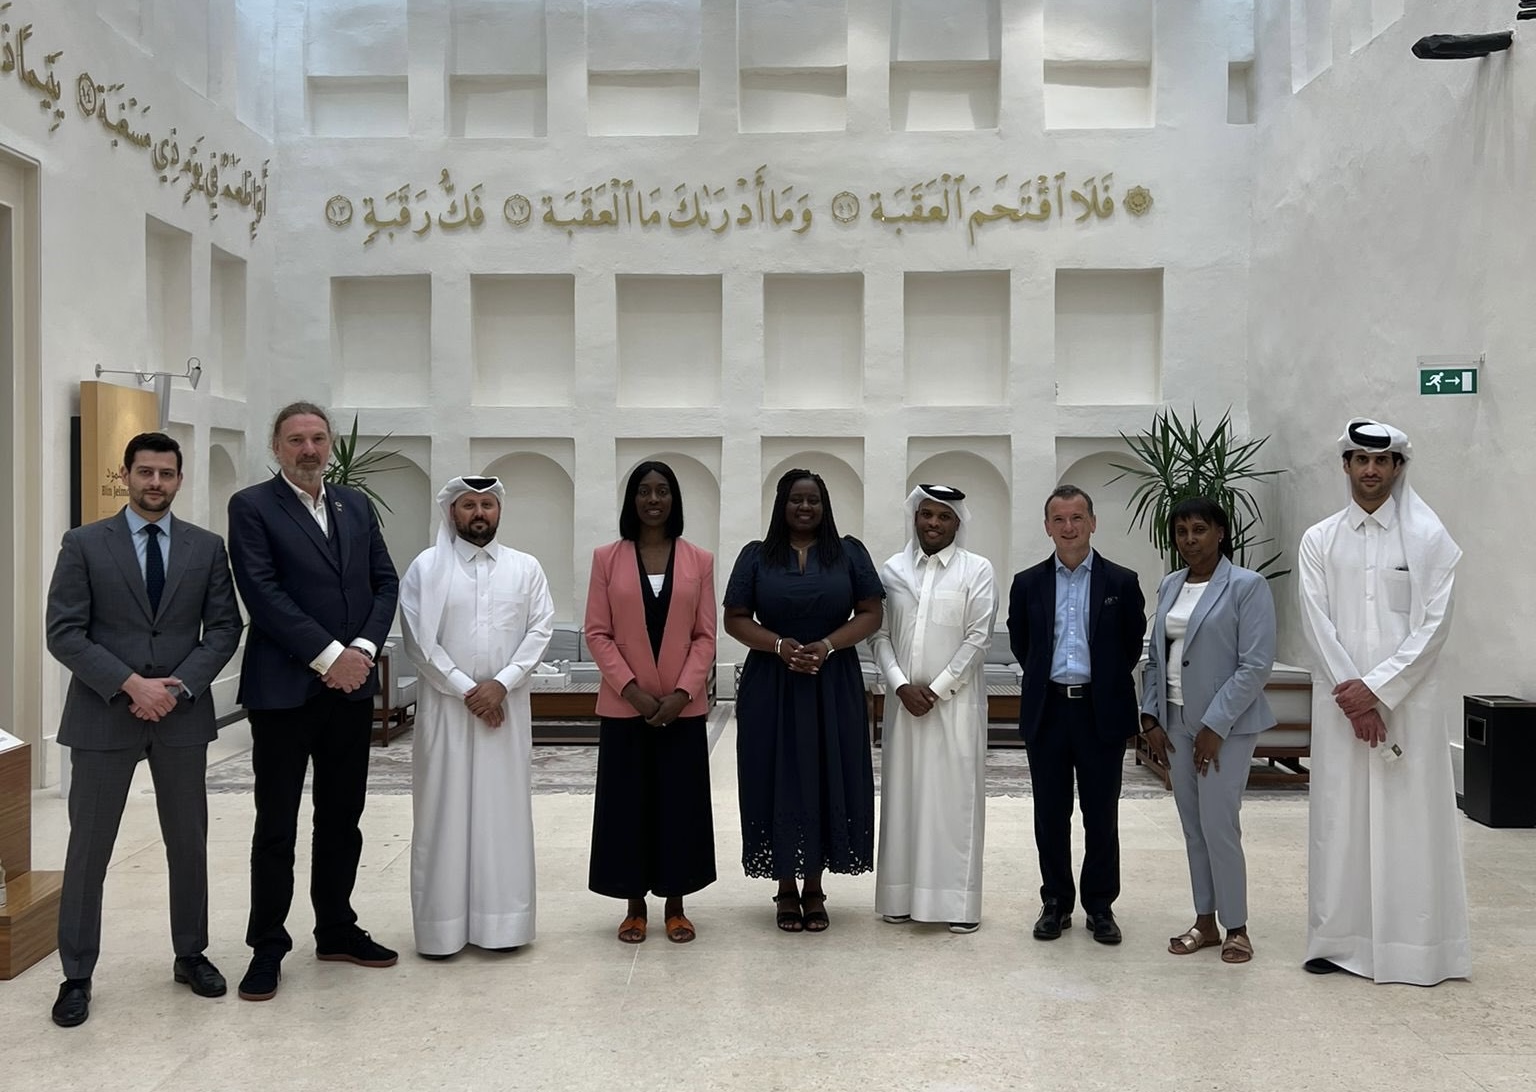 British MPs tour Msheireb Museums’ Bin Jelmood House